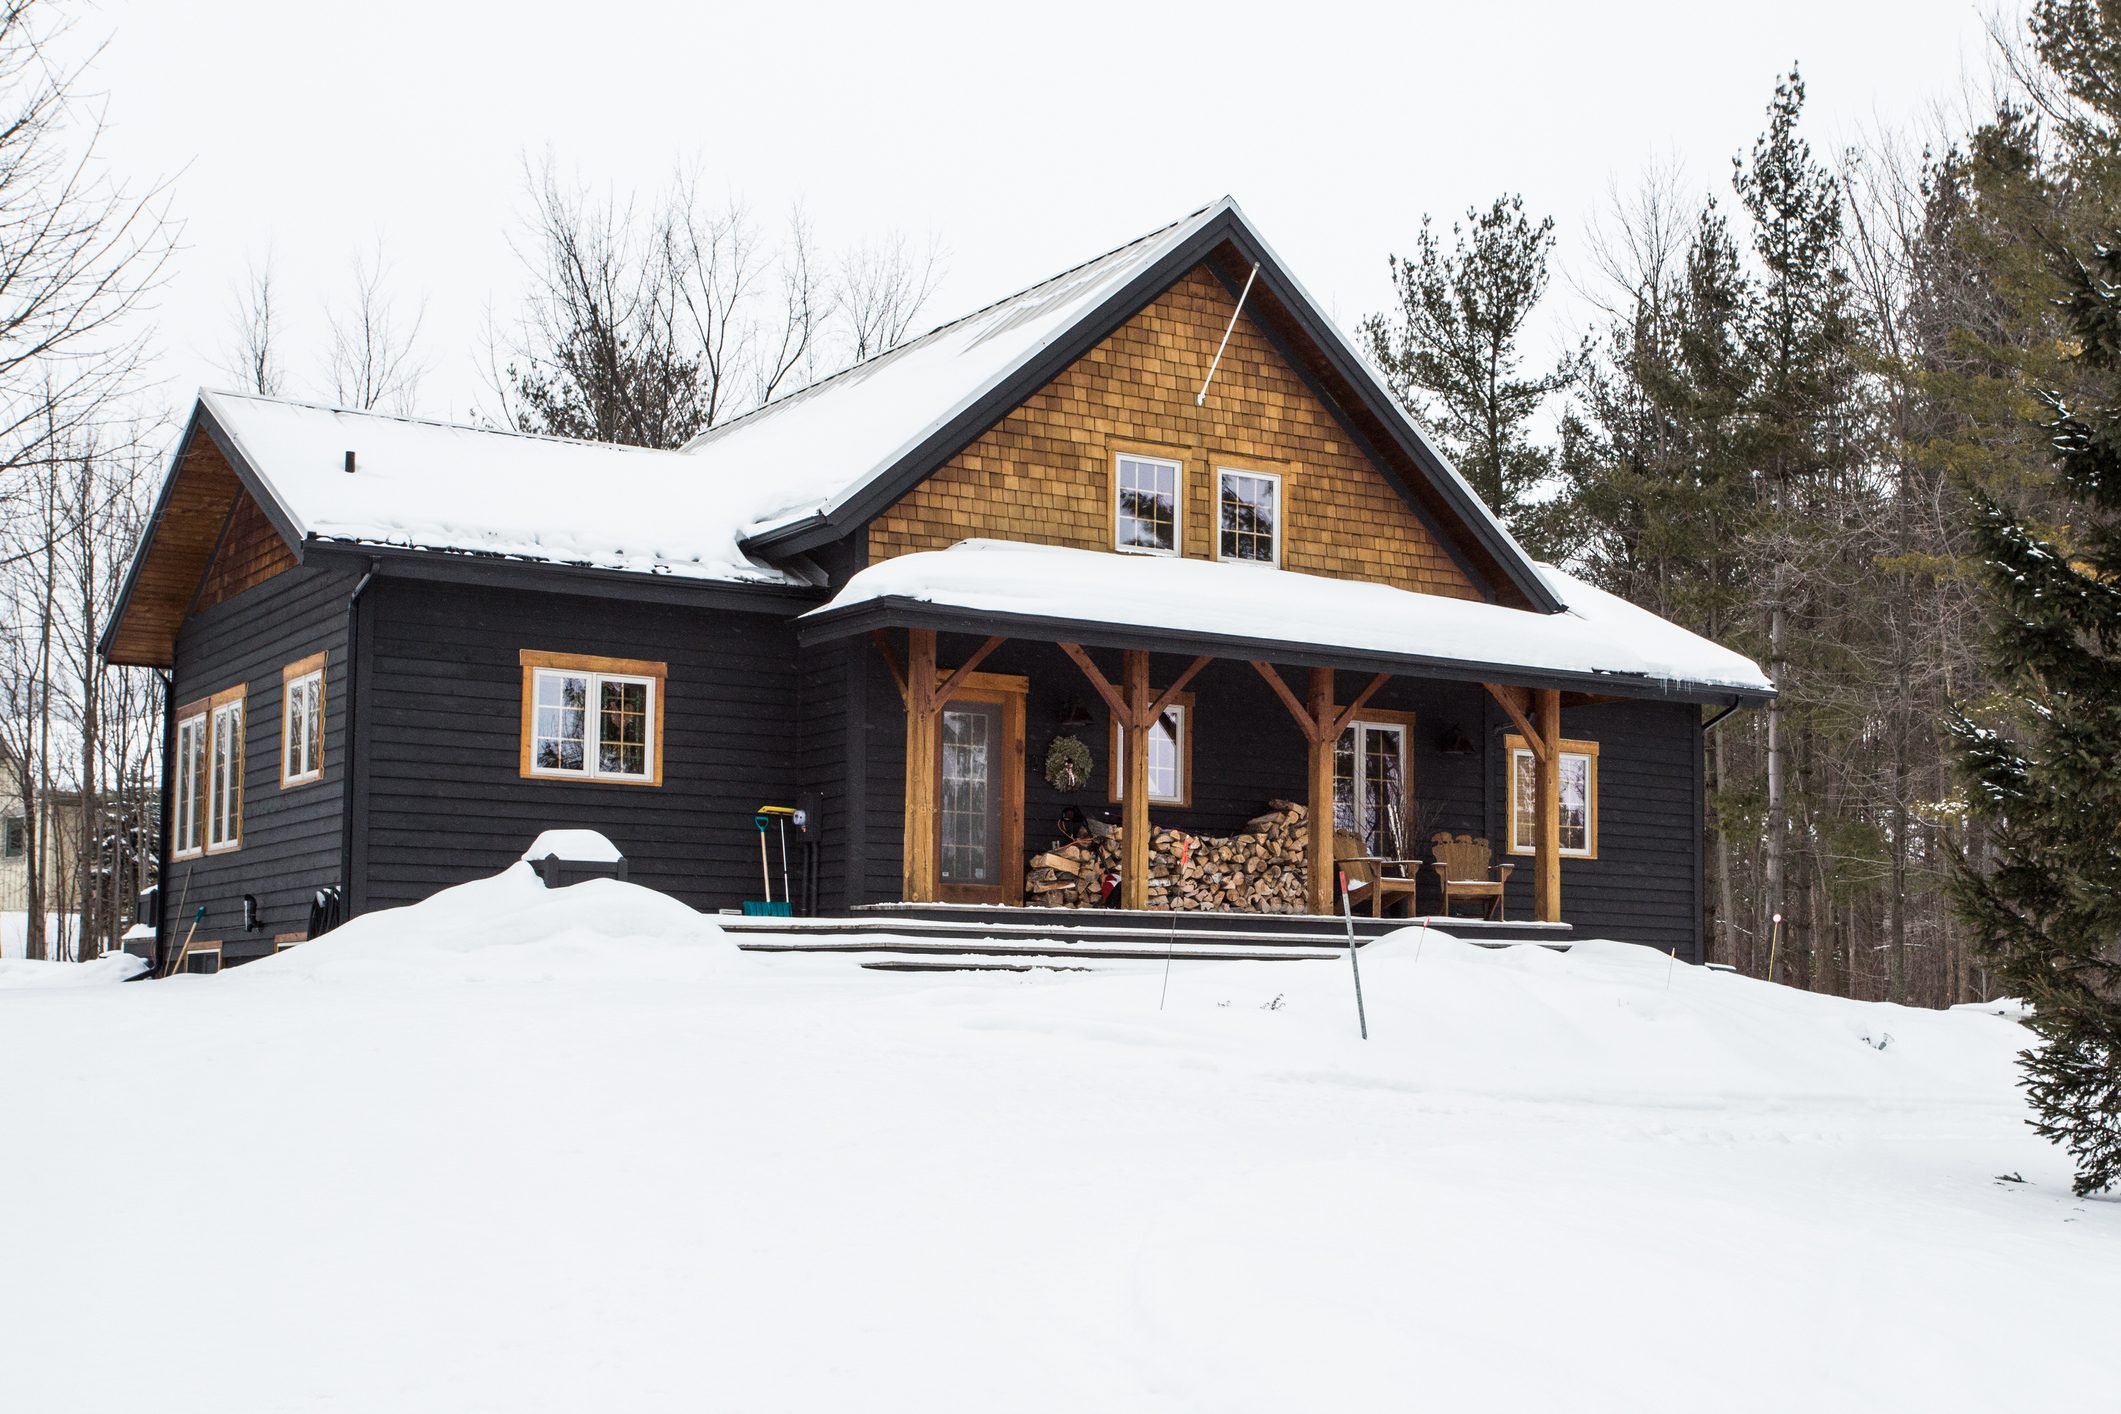 How To Winterize the Plumbing At Your Cabin